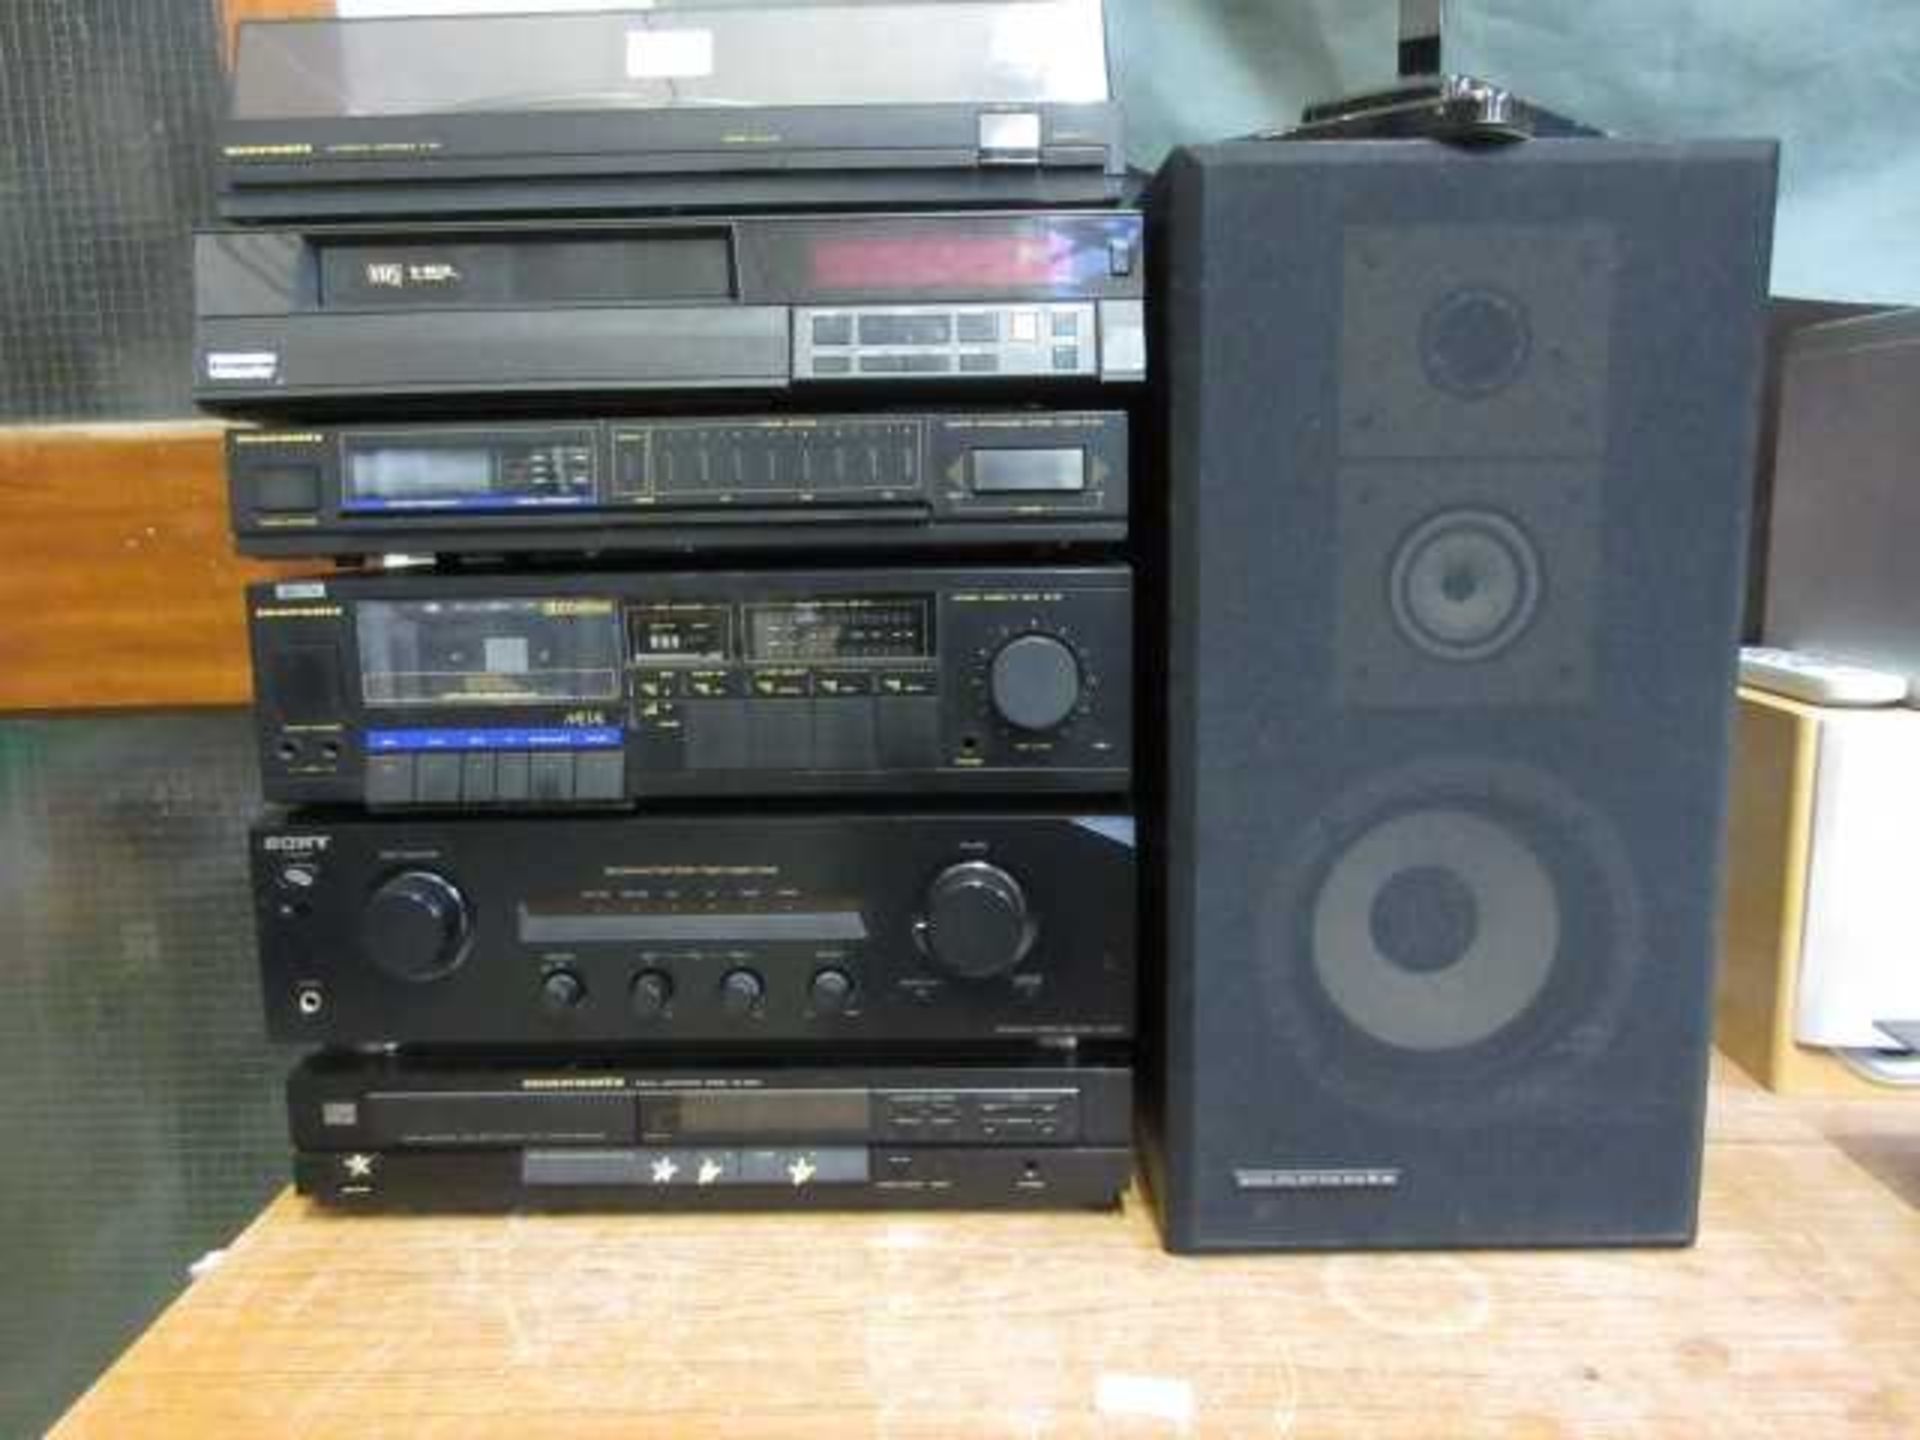 A Marantz HiFi stacking system with two speakers